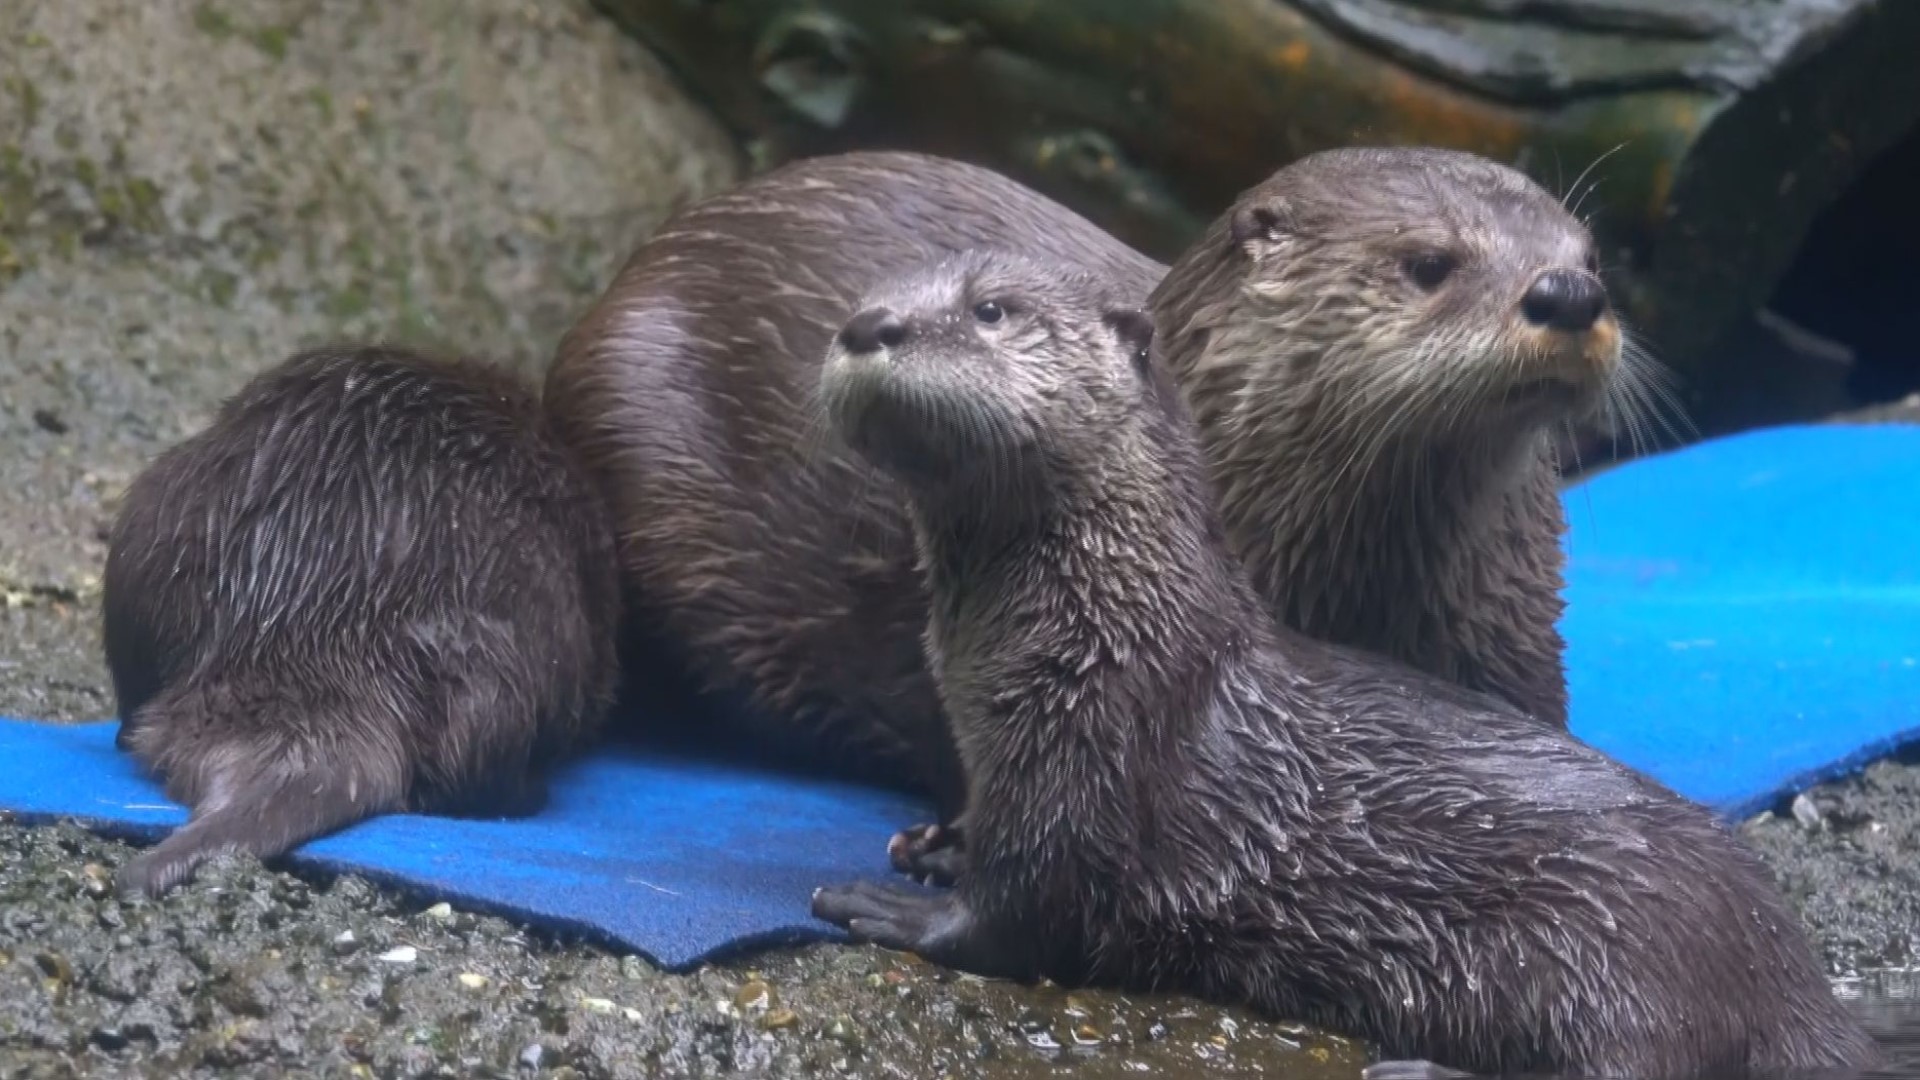 This is the first time in more than 70 years the river otters have been spotted on that river.